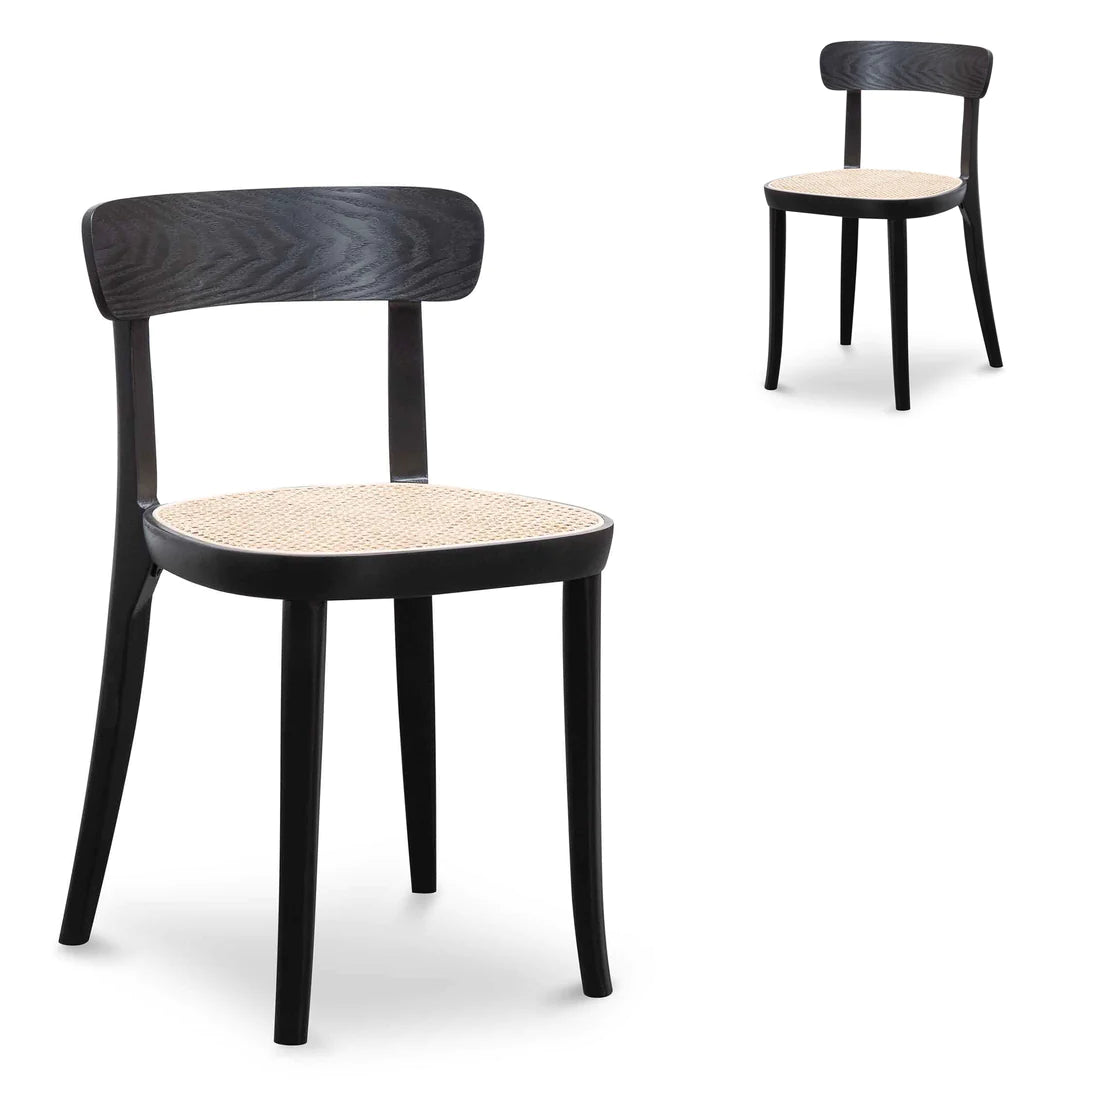 Rattan Dining Chair - Black with Natural Seat(Set of 2)